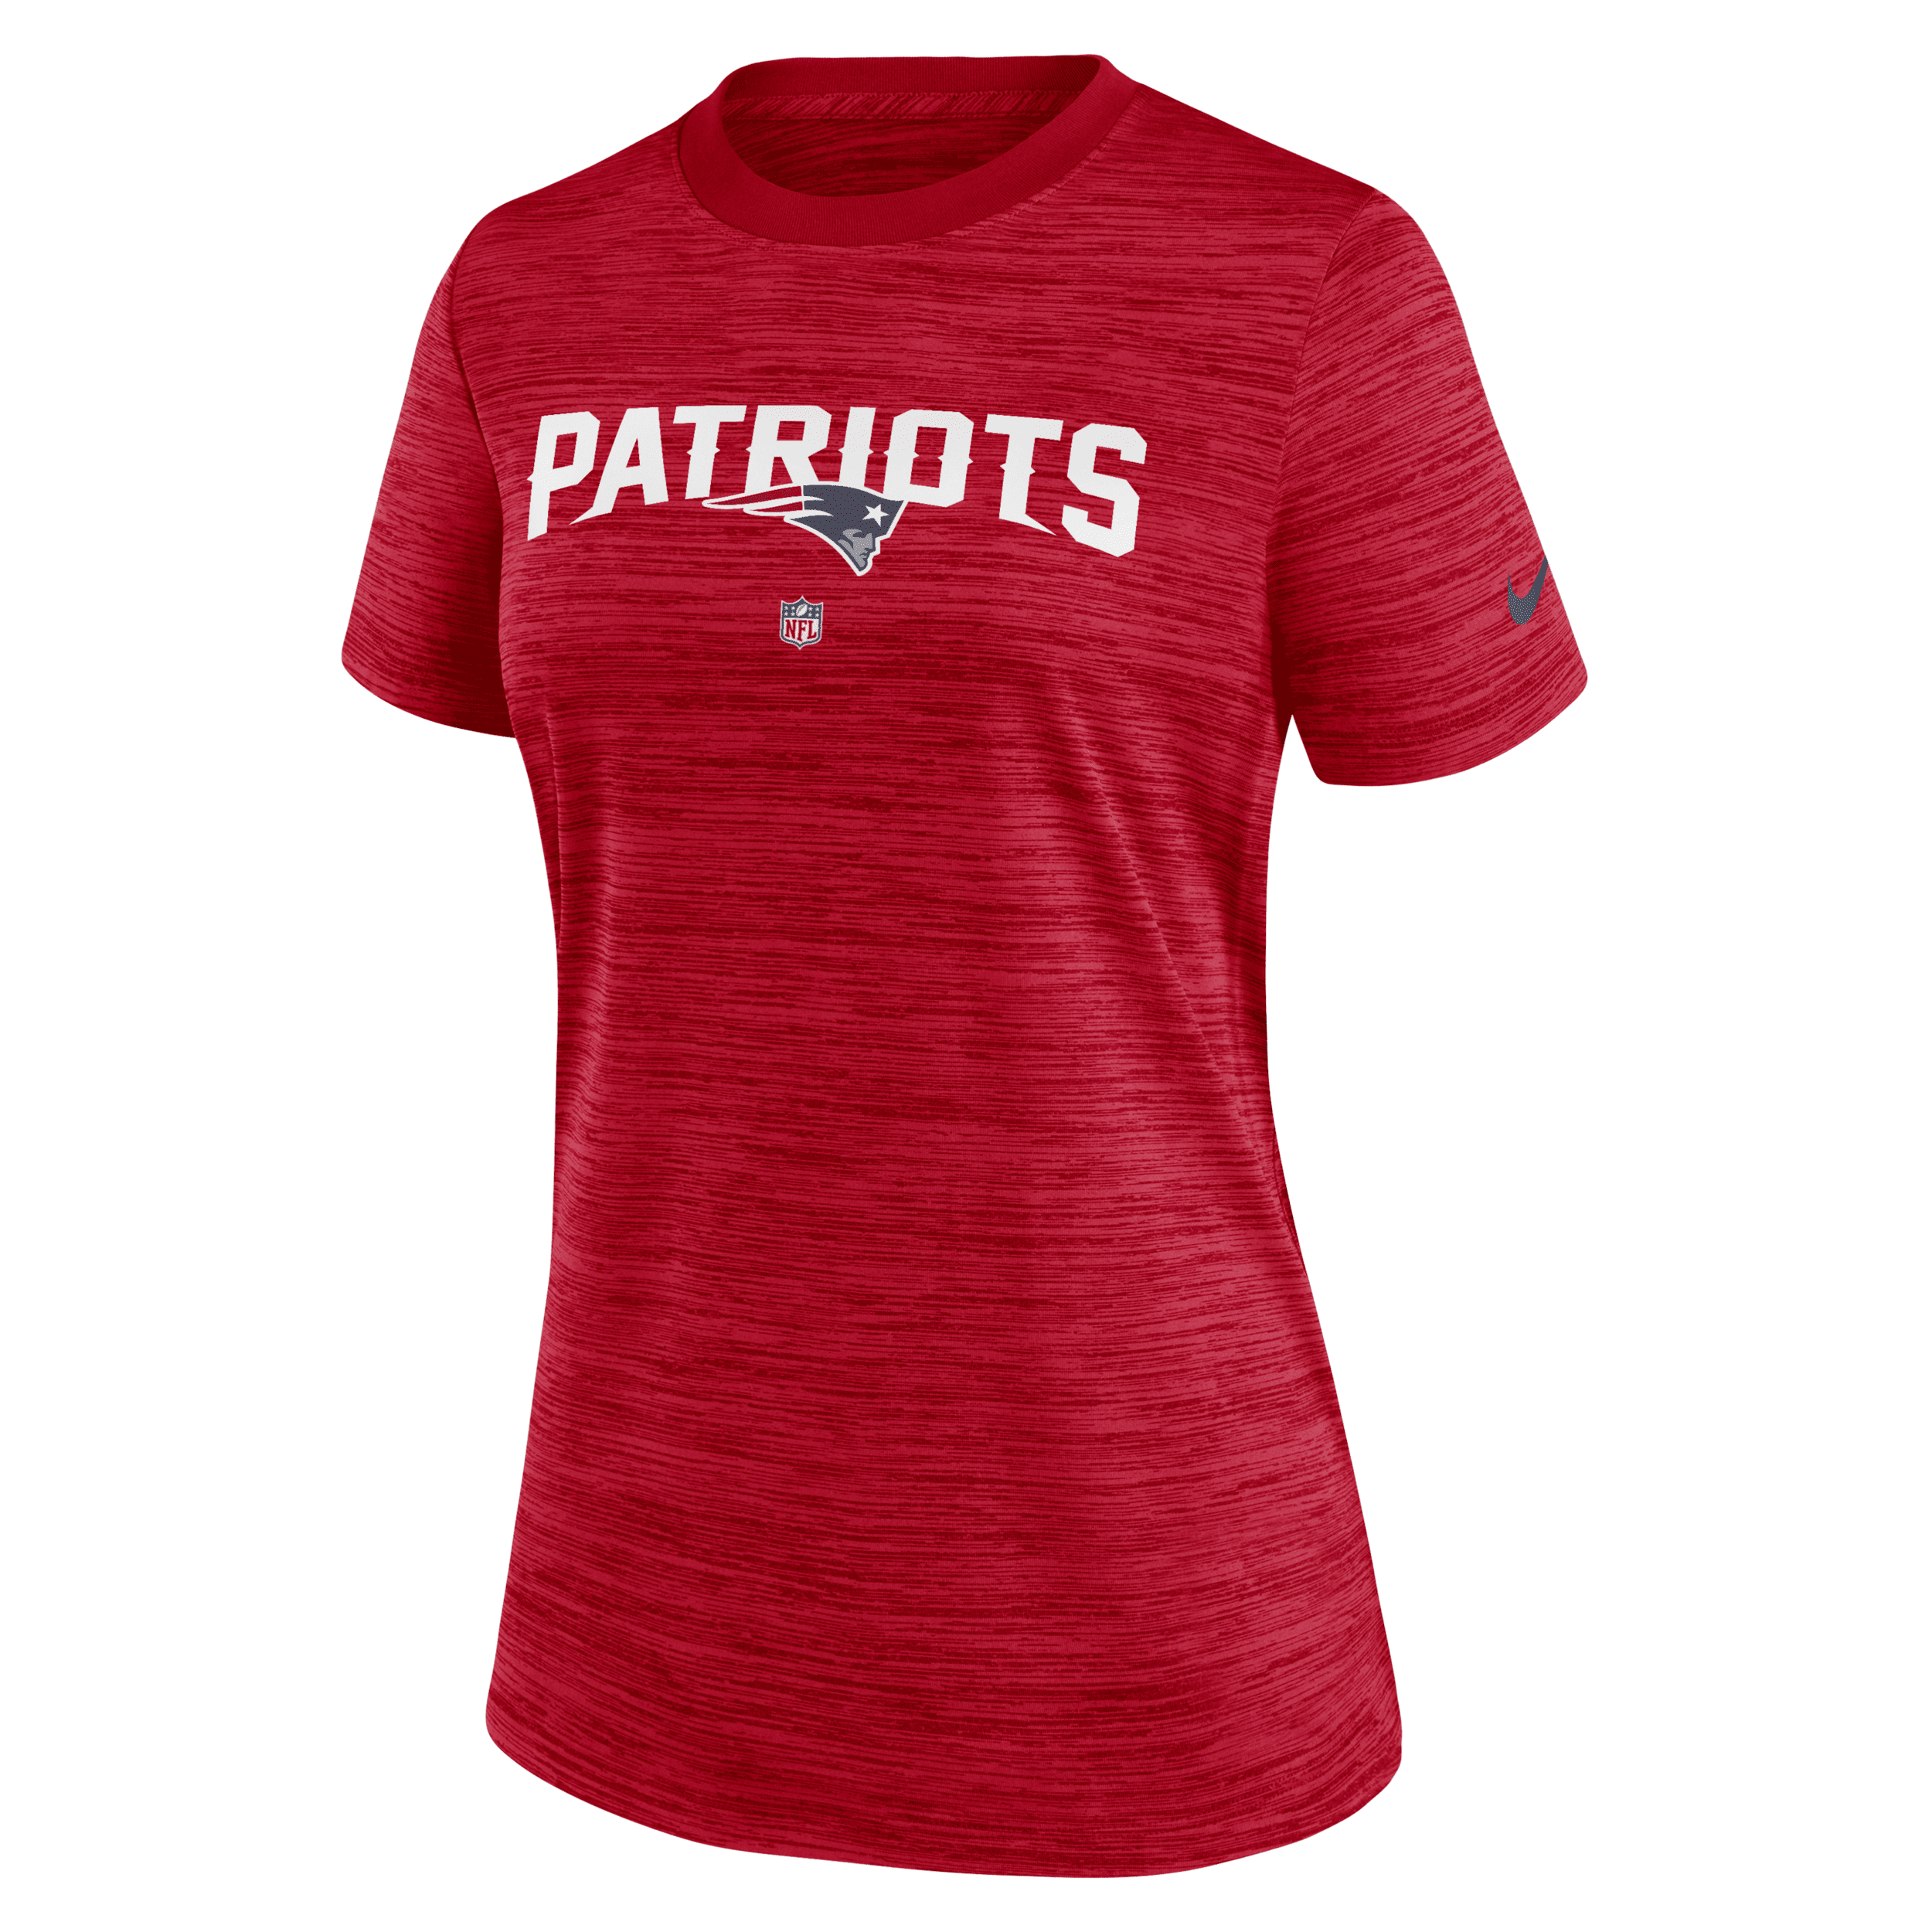 Nike Women's Dri-fit Sideline Velocity (nfl New England Patriots) T-shirt In Red